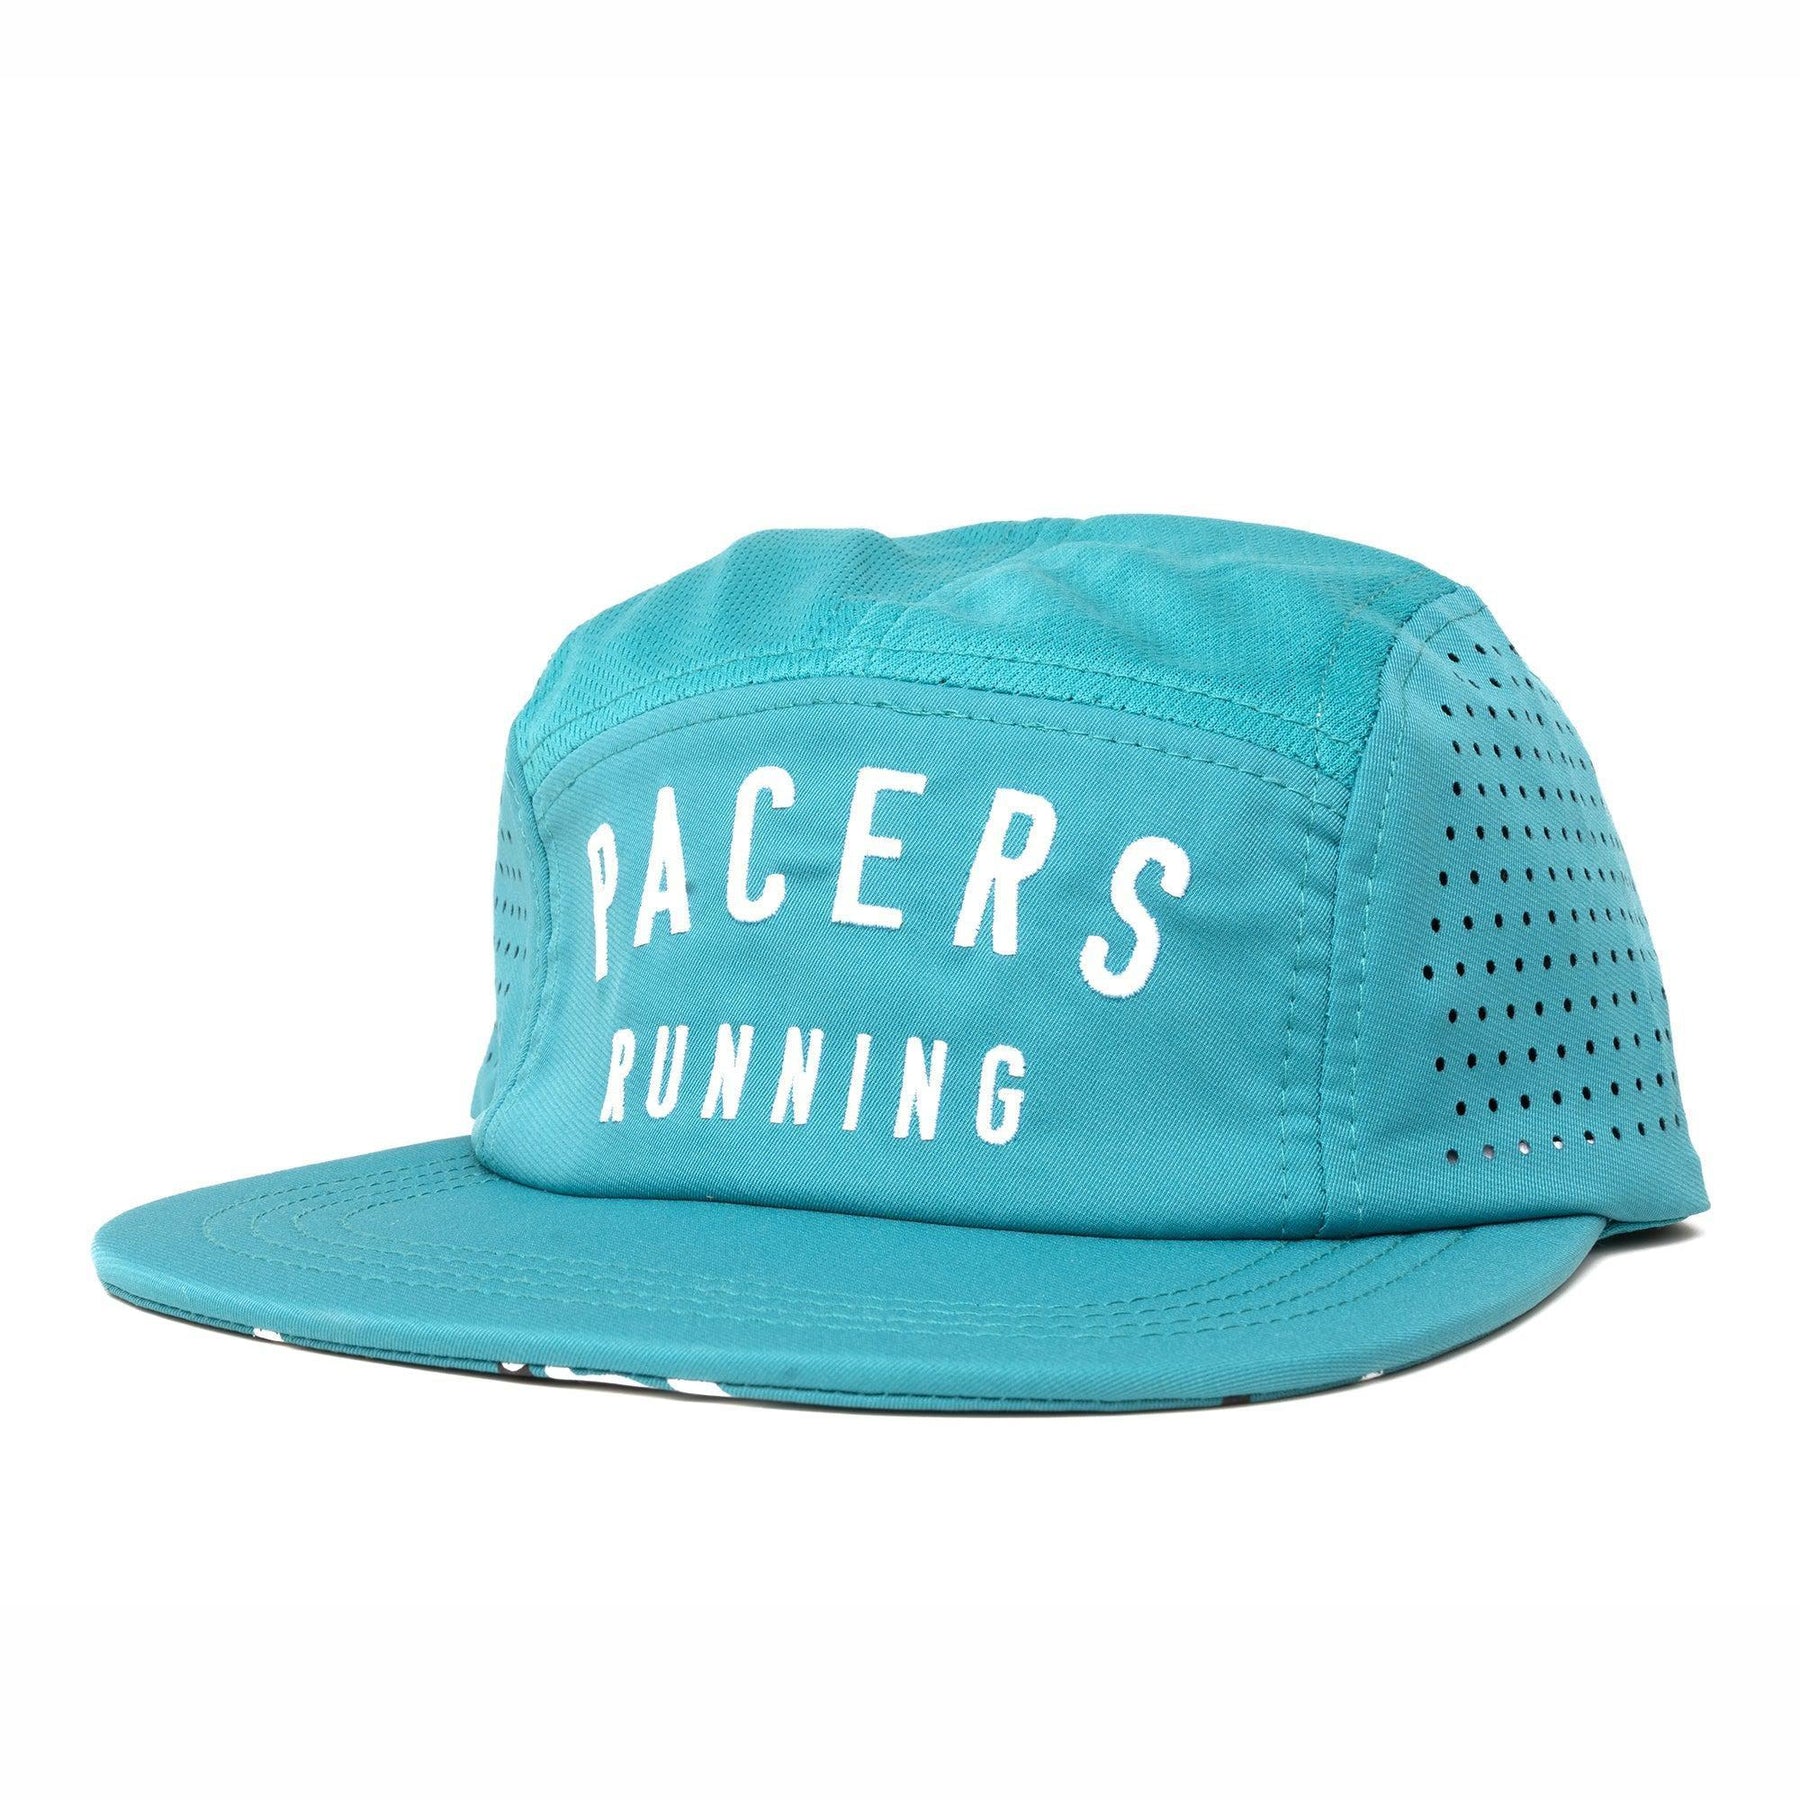 Pacers Running-2:02 Running Hat DC Half-Pacers Running